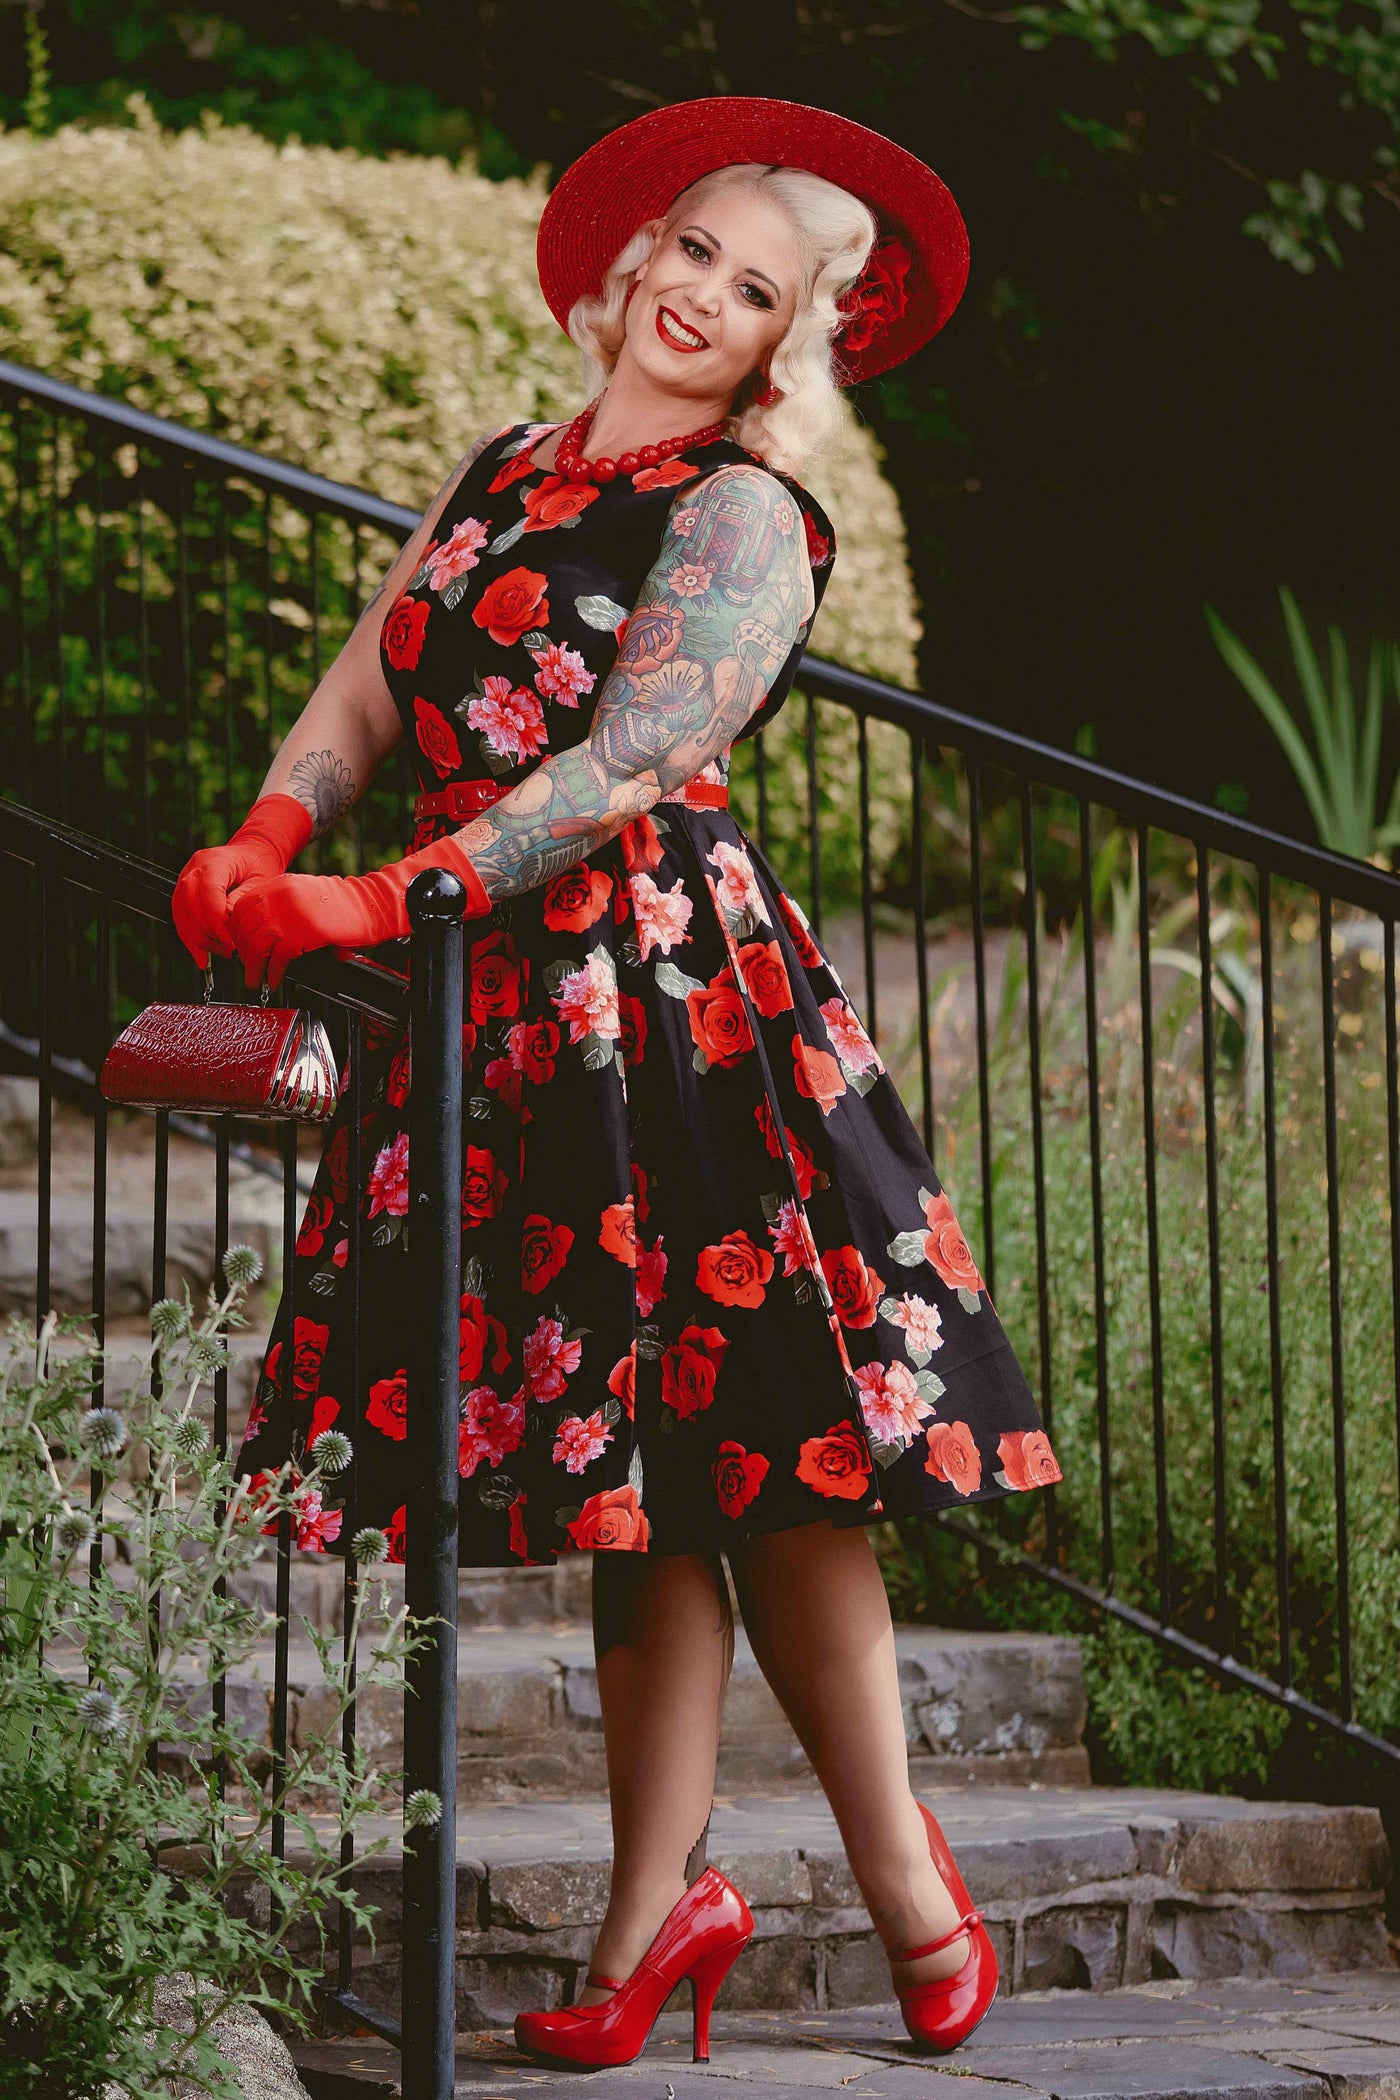 Floral Swing Dress in Black with Red Roses